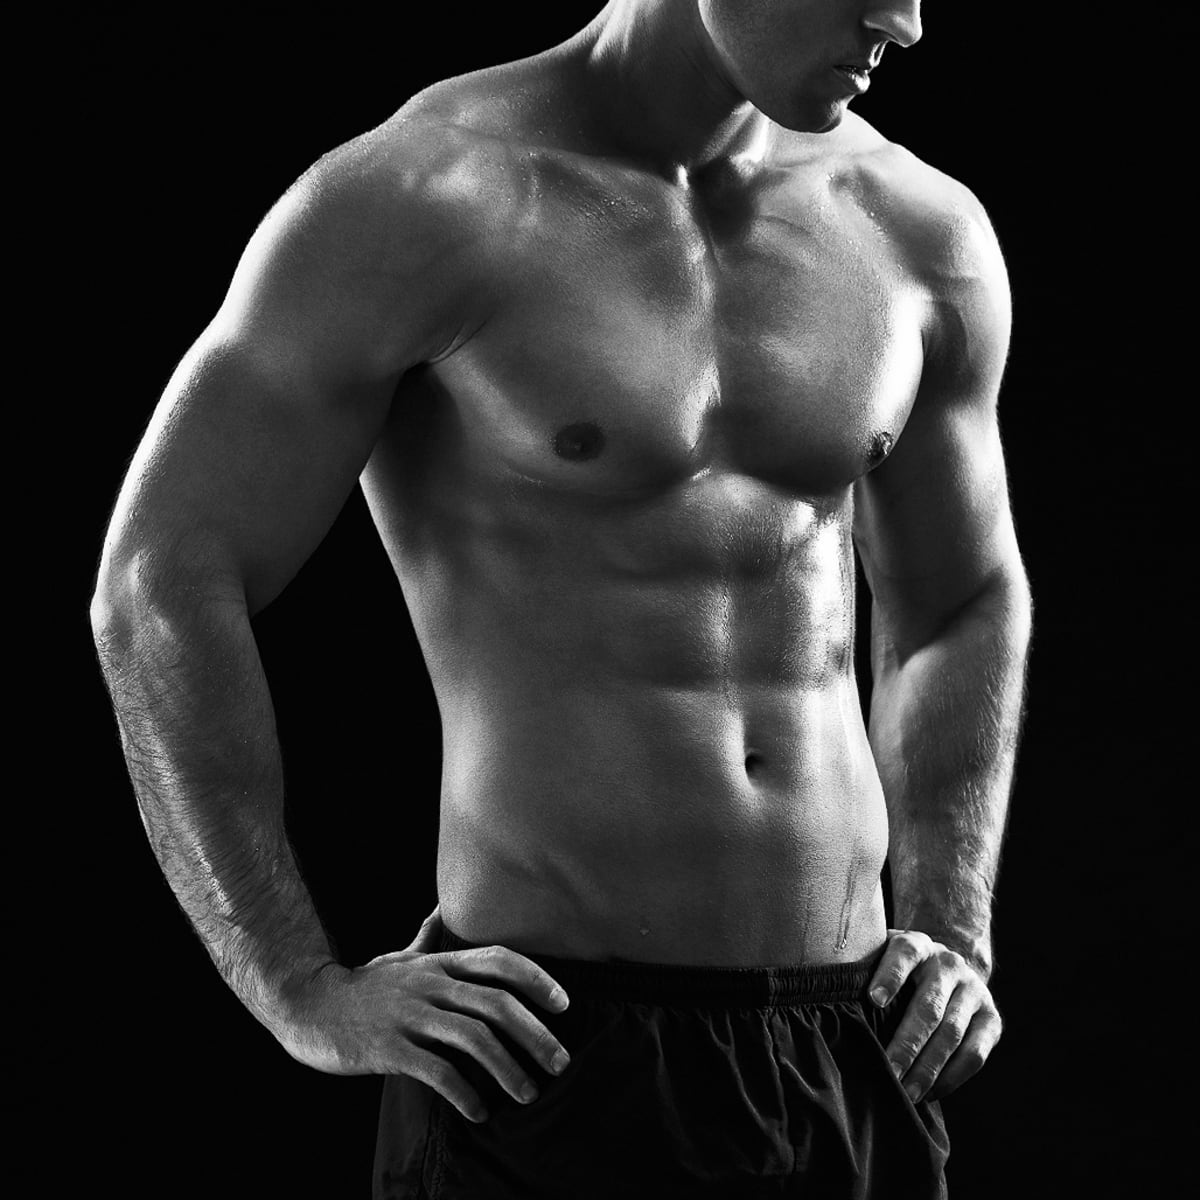 Measuring body fat percentage Black and White Stock Photos